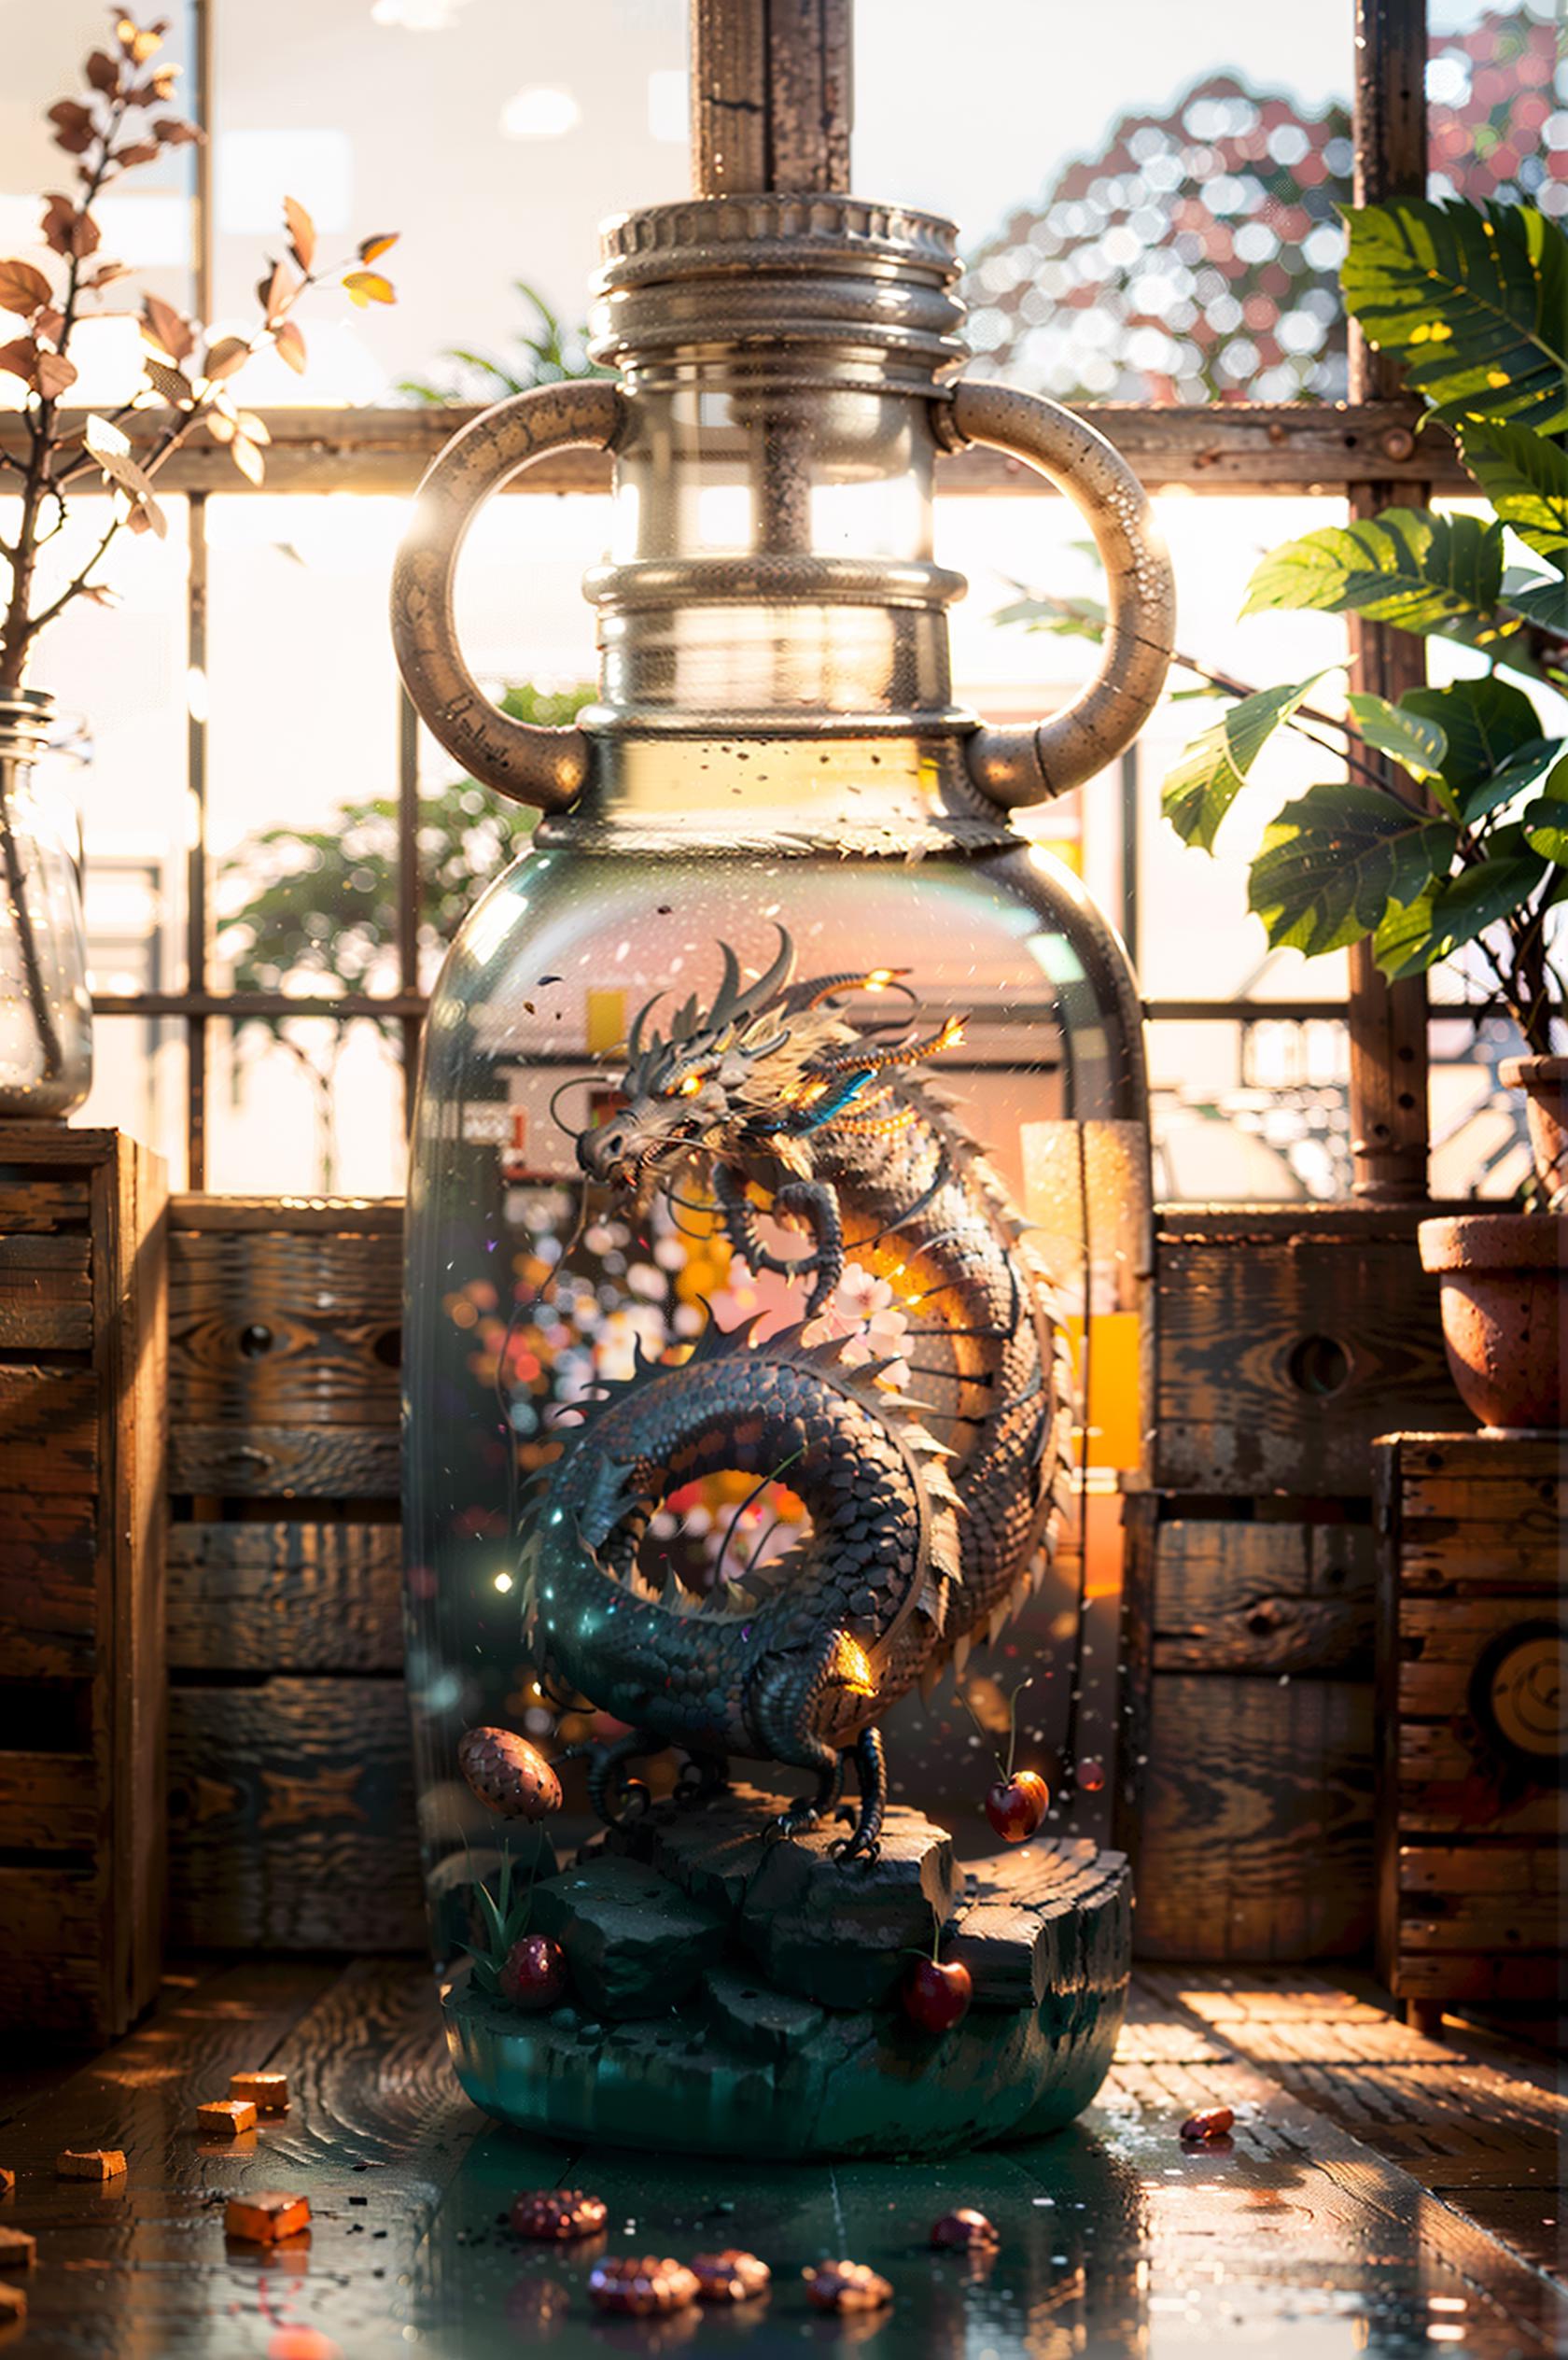 Girl in the Bottle (瓶中少女） - LoCon image by royalcreed